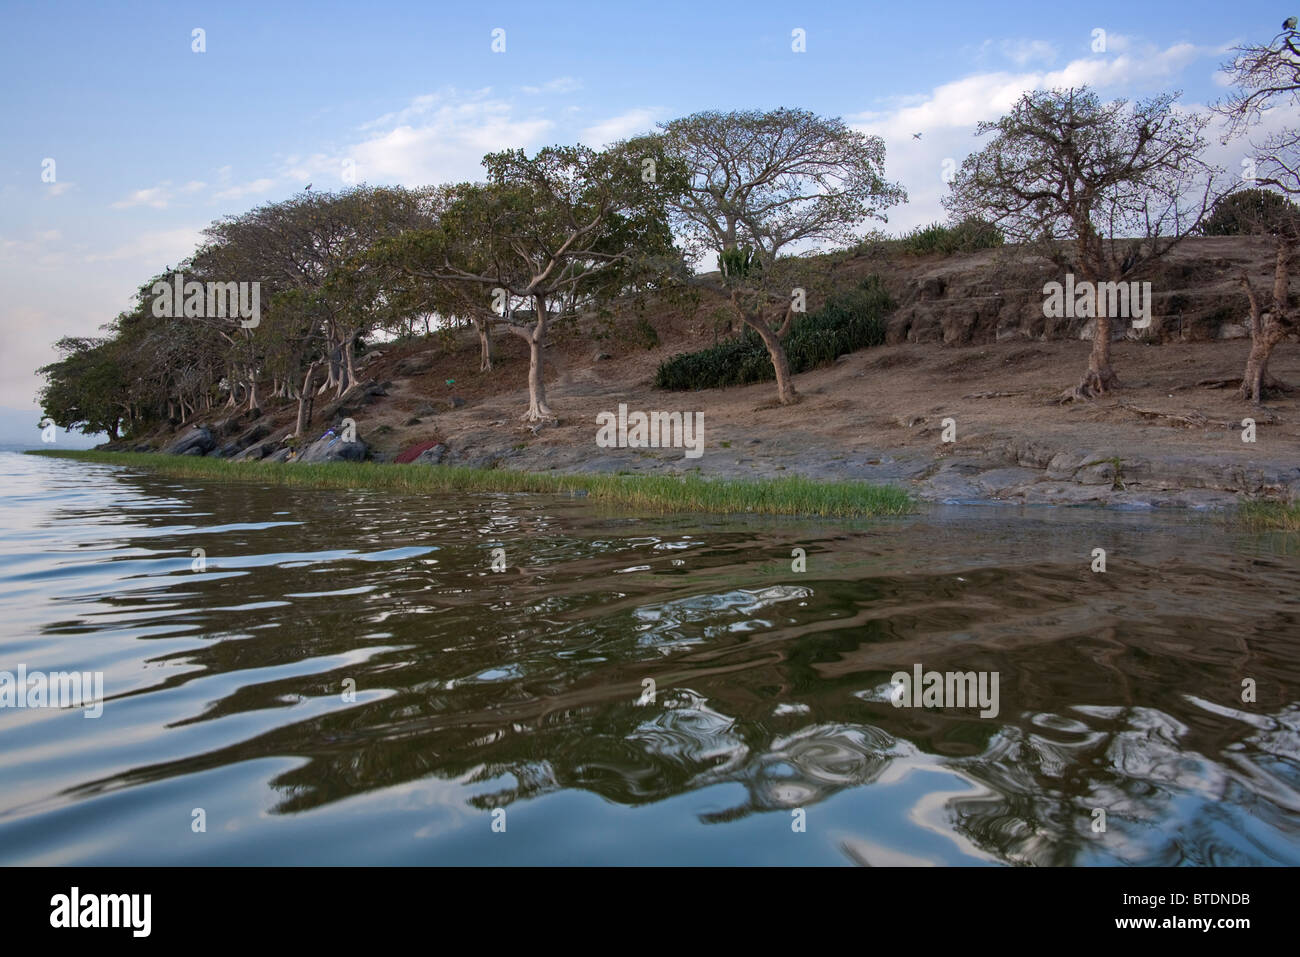 Scenic view of the shore of Lake Awassa with trees and a rocky outcrop Stock Photo